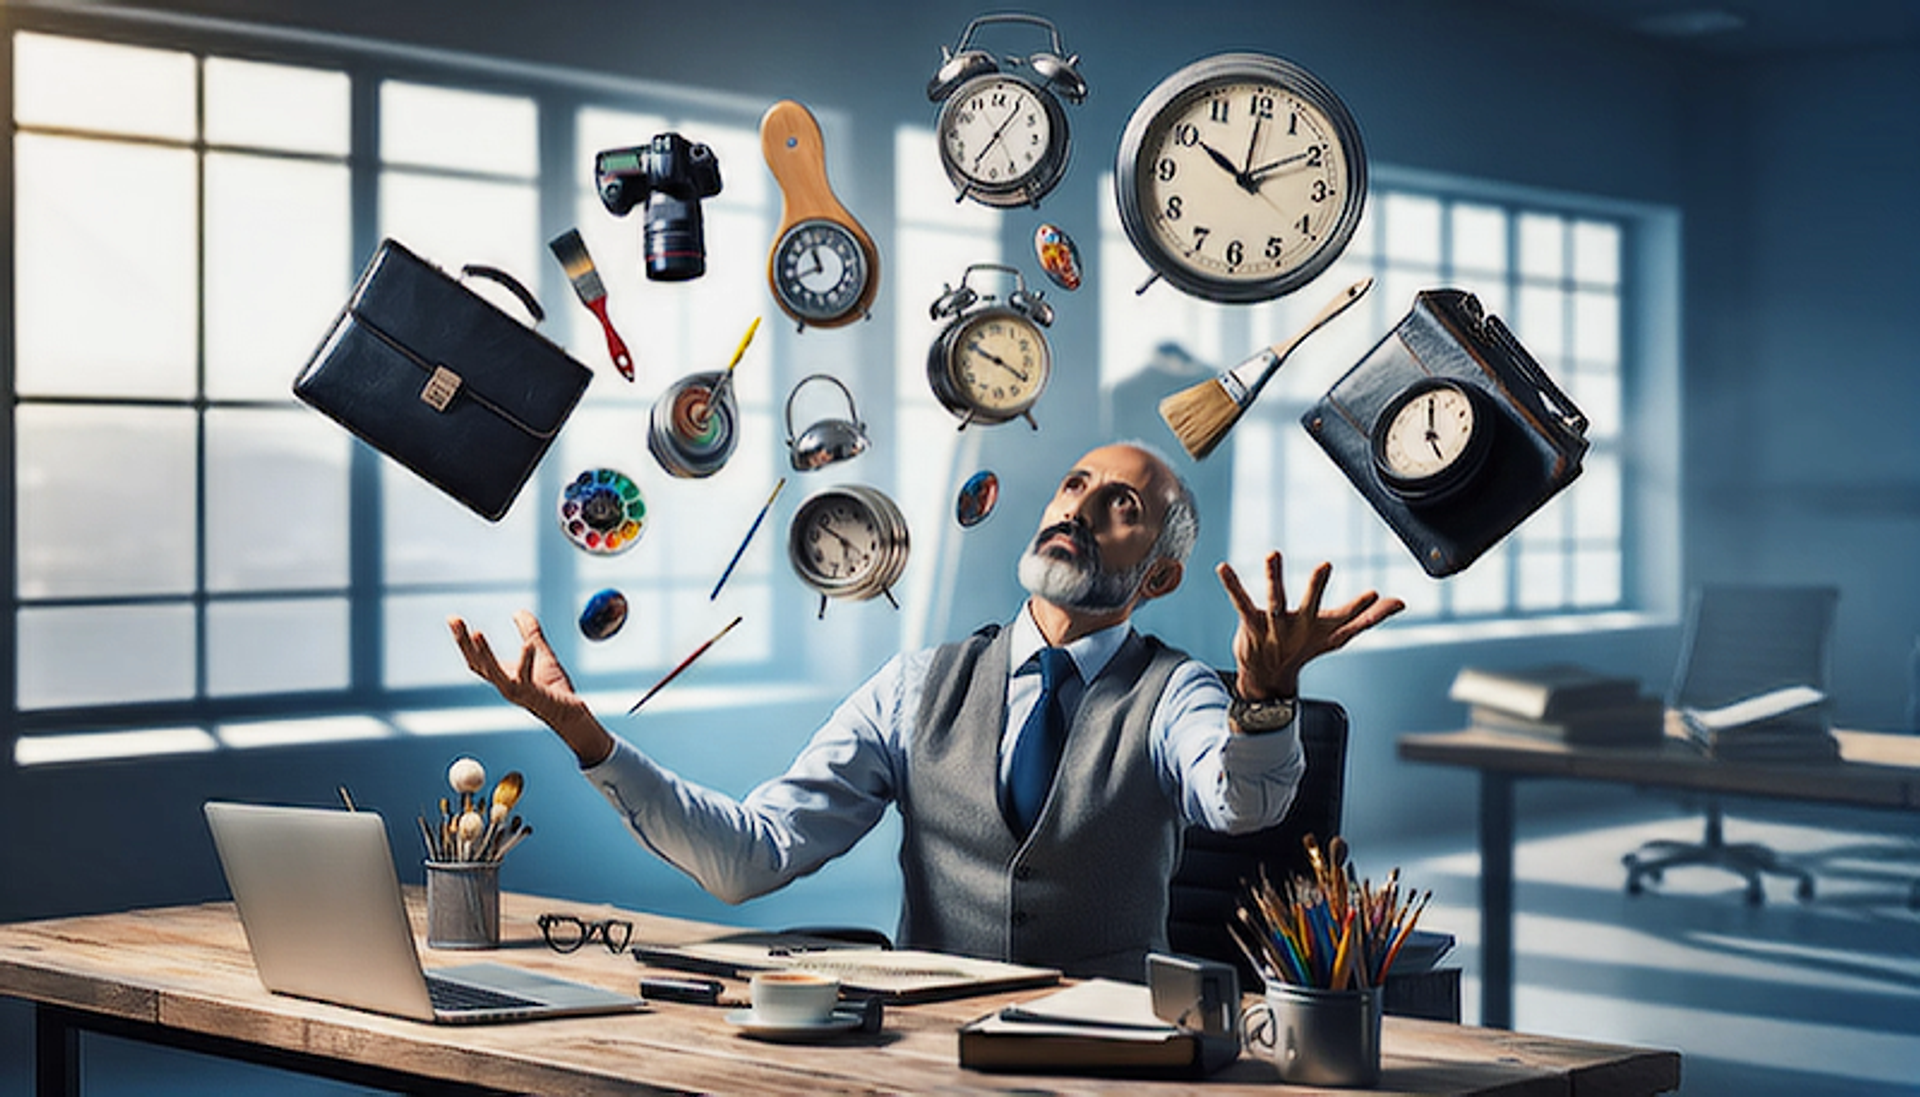 Image of office worker juggling many items in their office